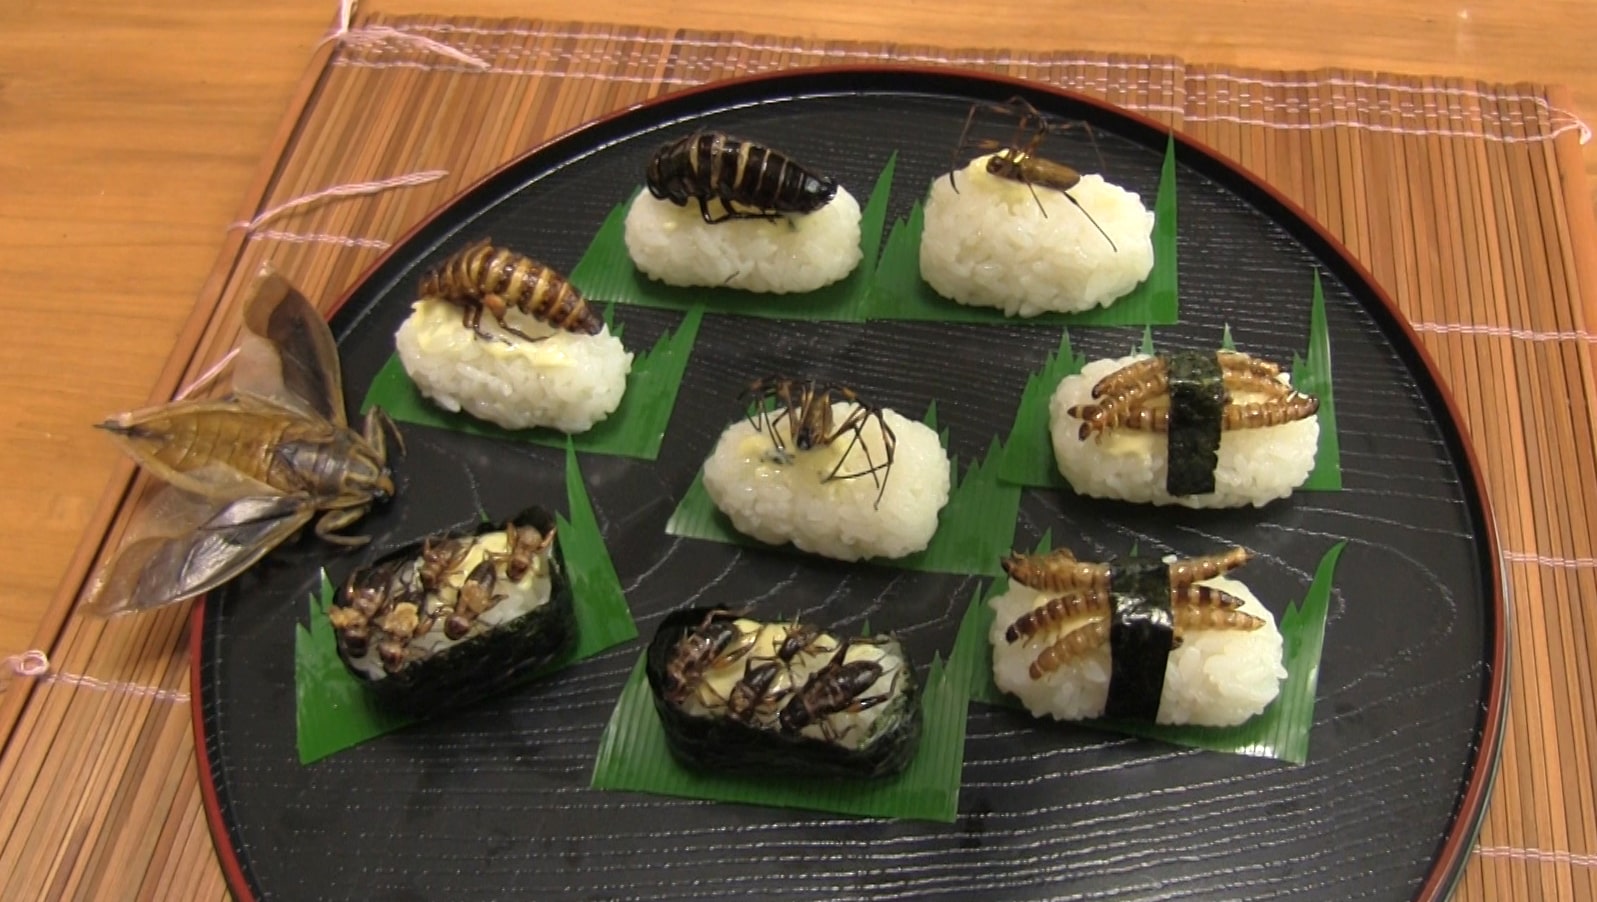 Weirdest Japanese Food 17 - insect sushi